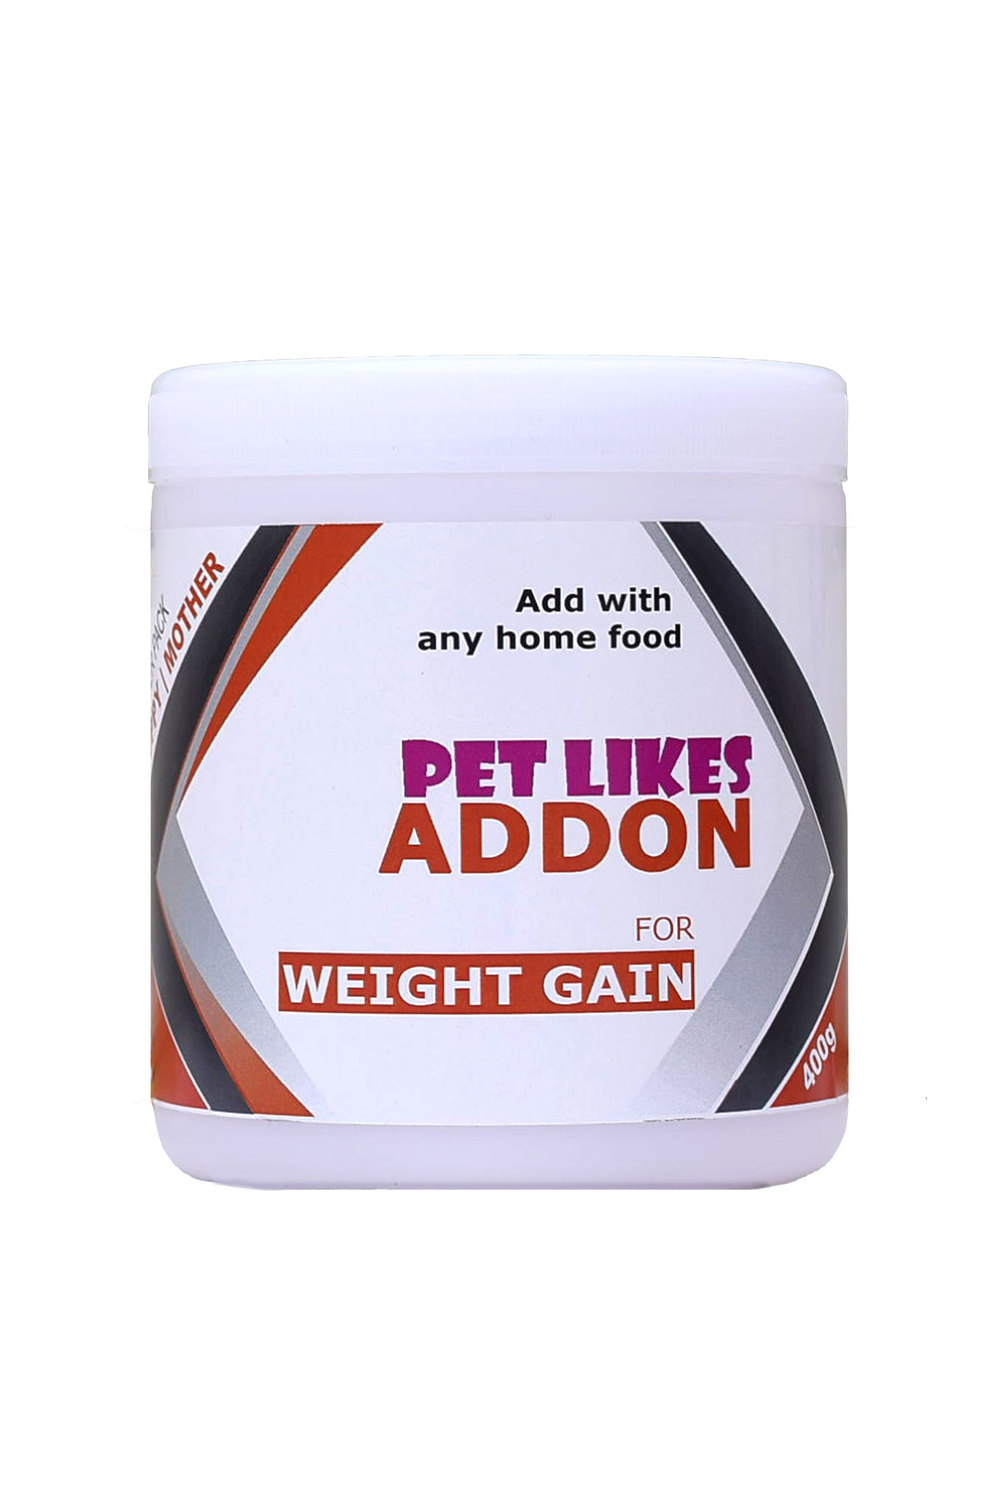 Pet Likes ADD ON Weight Gain – 400g. The 3-Week Weight Gain Dog Food